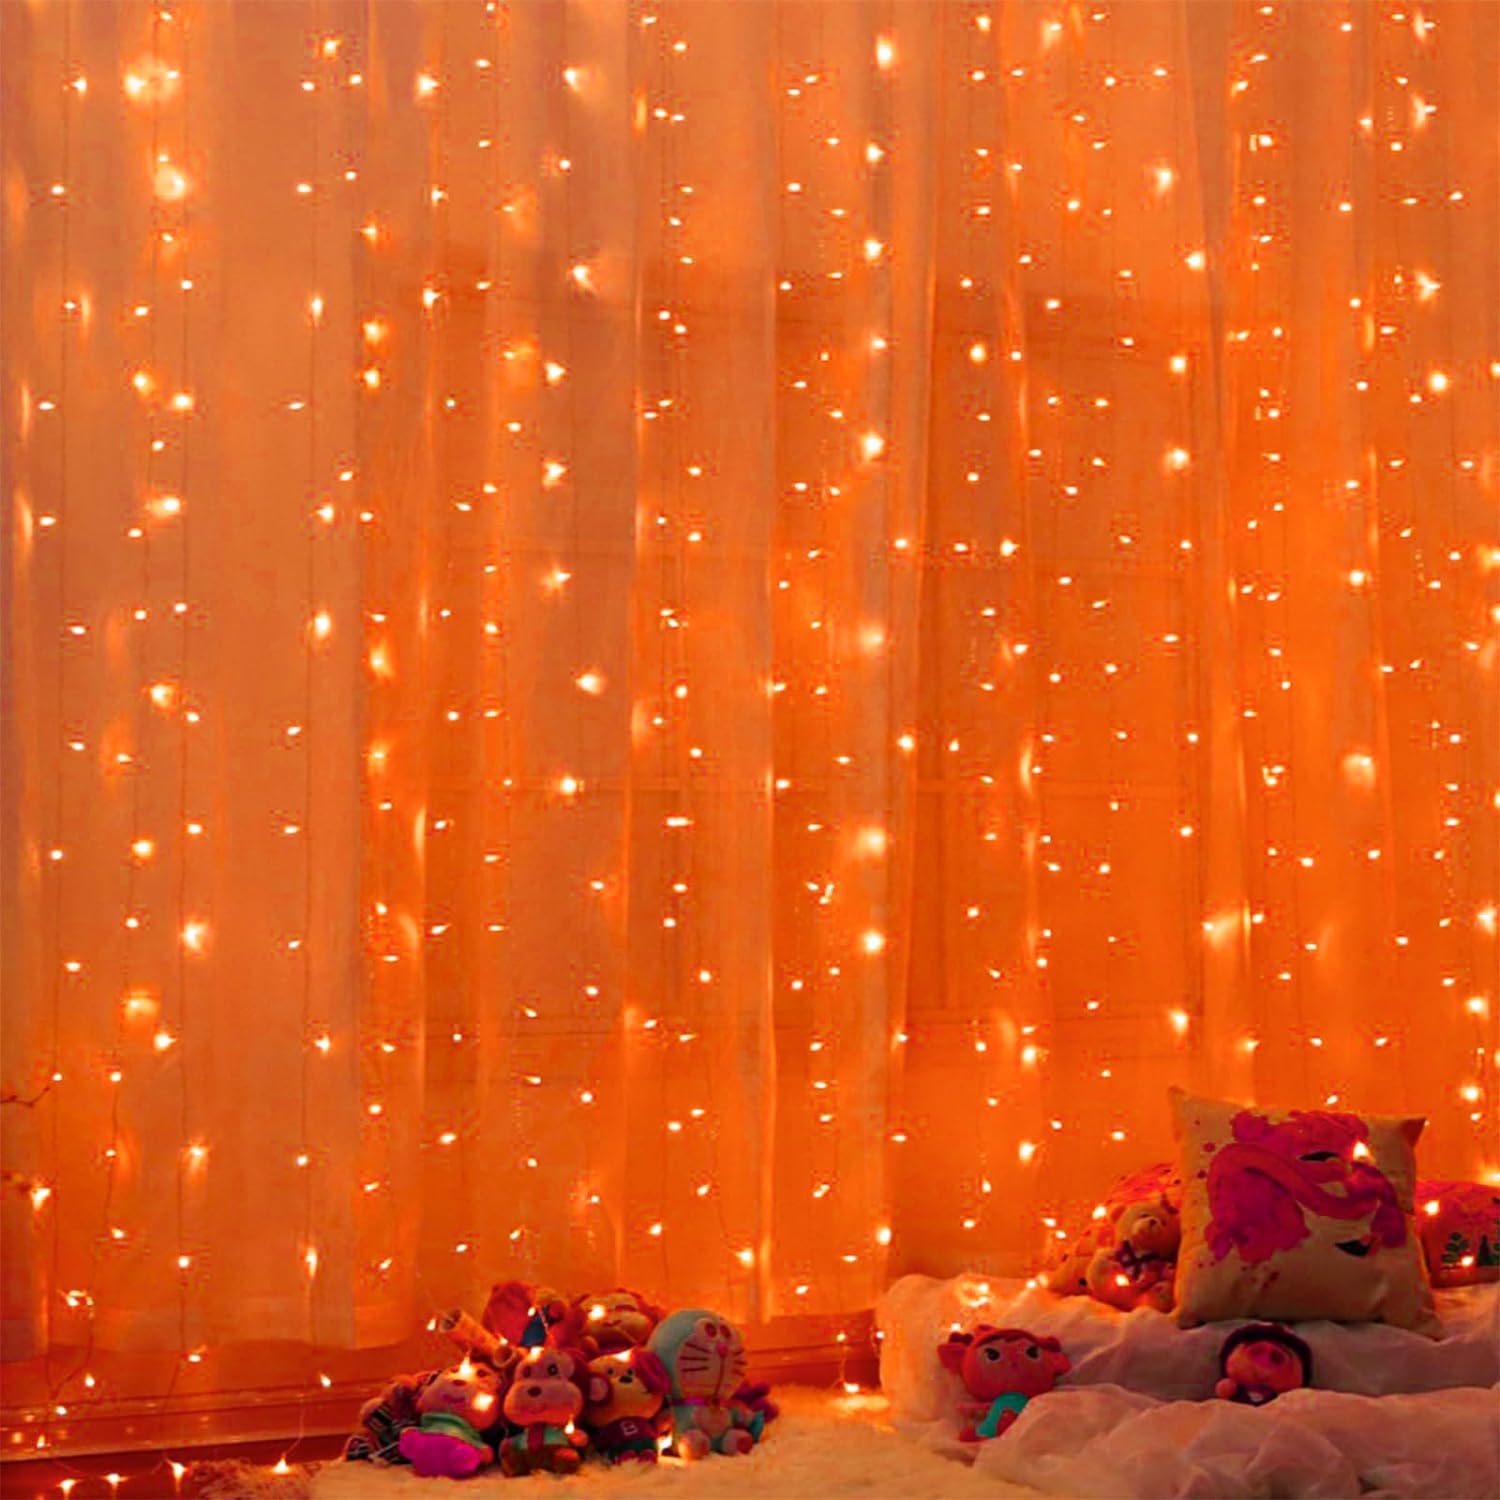 Twinkle Star 300 LED Window Fairy Curtain String Lights, 8 Modes Fairy Lights for Halloween Christmas Bedroom Wedding Party Home Garden Outdoor Indoor Wall Decorations, Orange